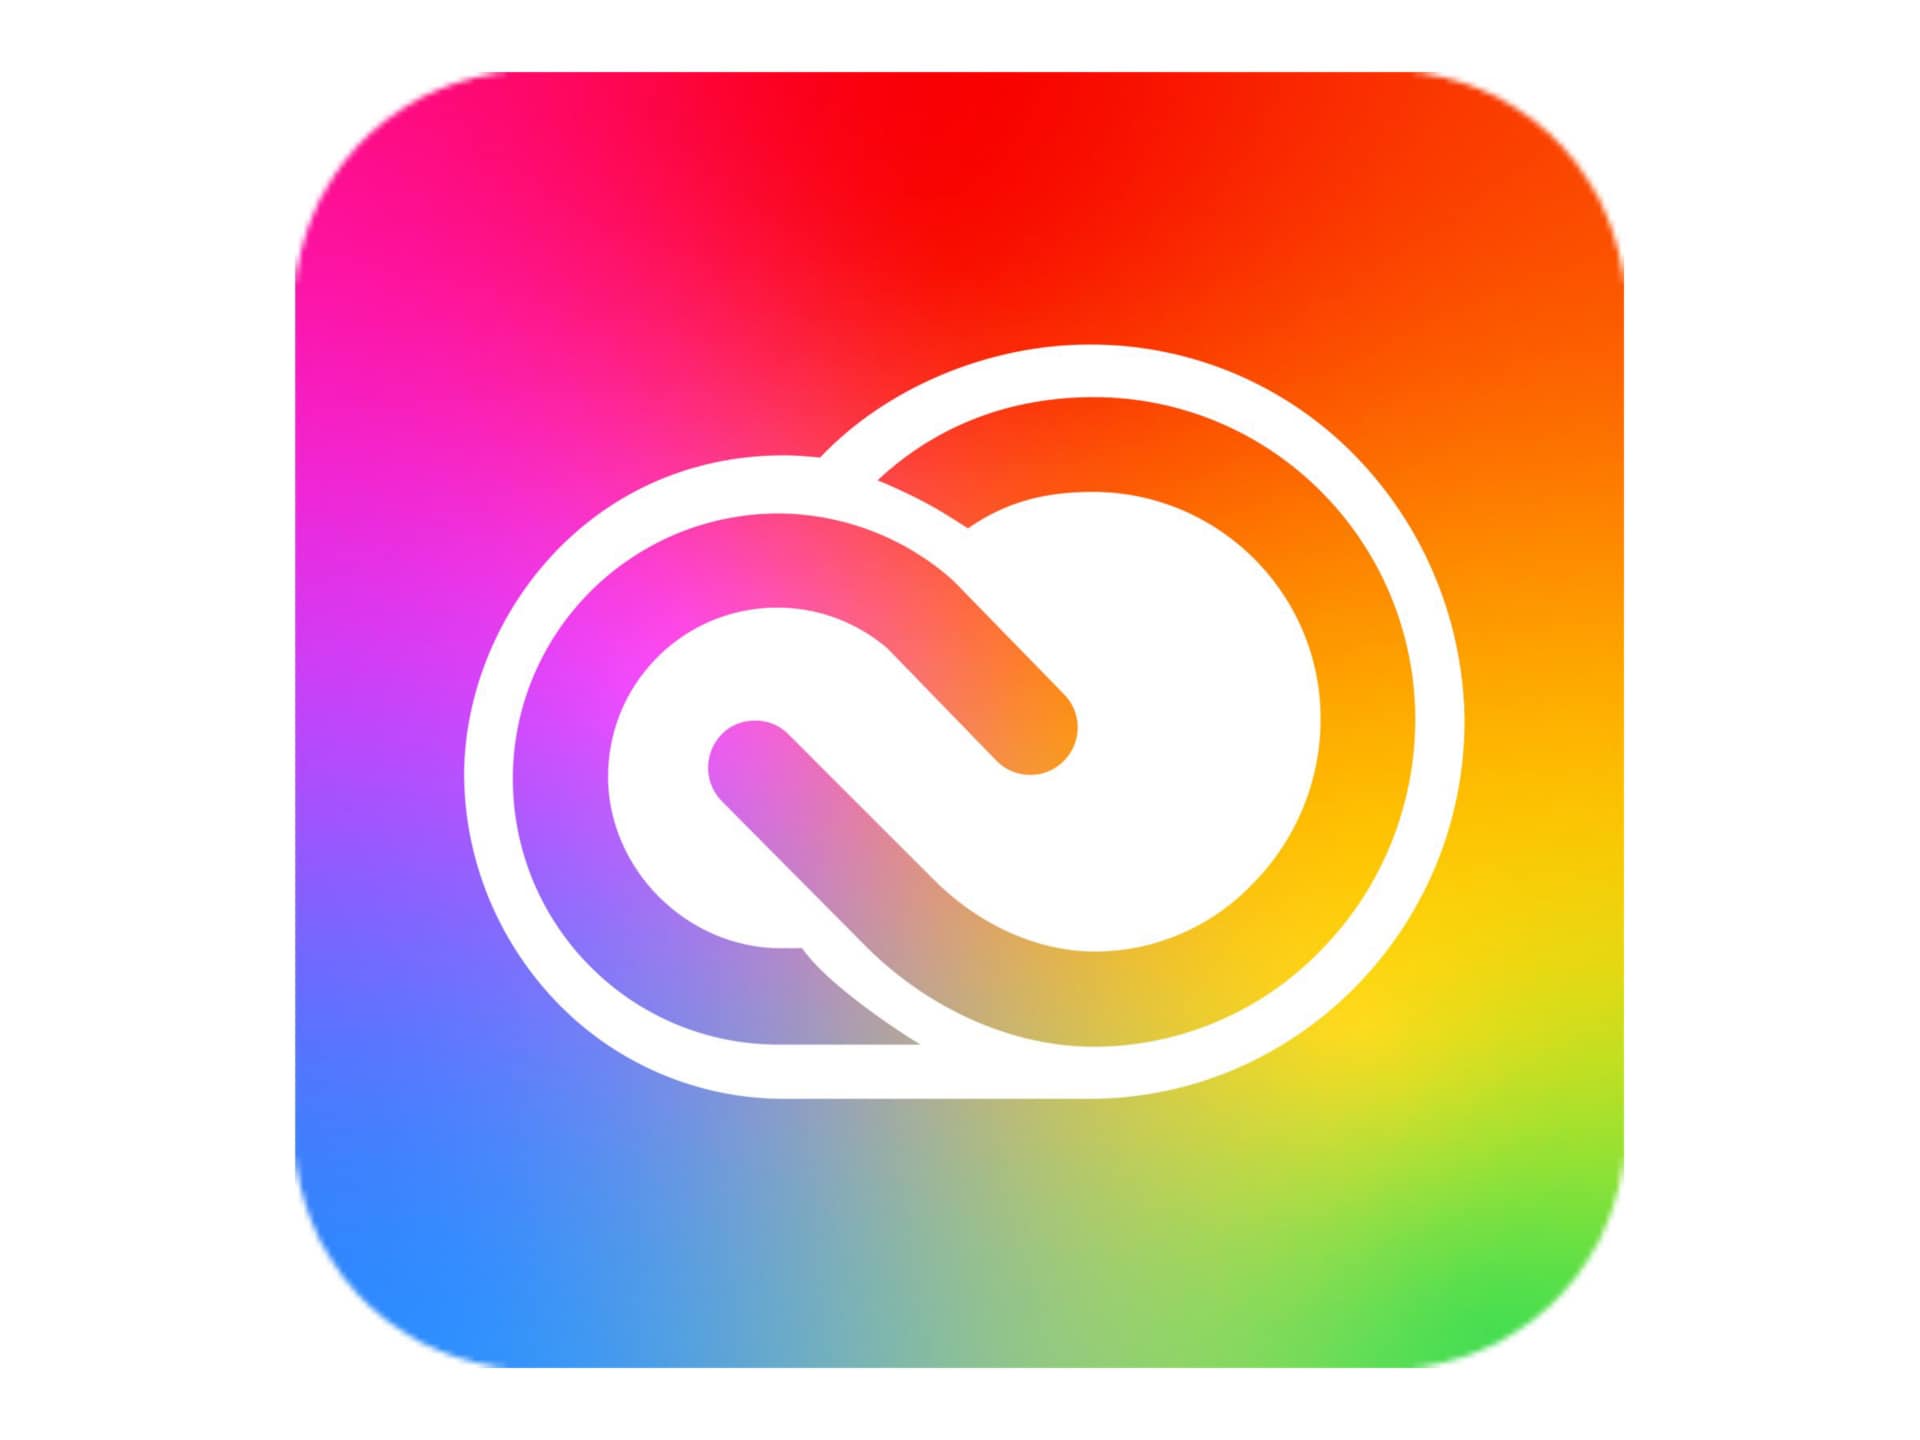 Adobe Creative Cloud for teams - Subscription New (4 months) - 10 assets, 1 named user - with Adobe Stock